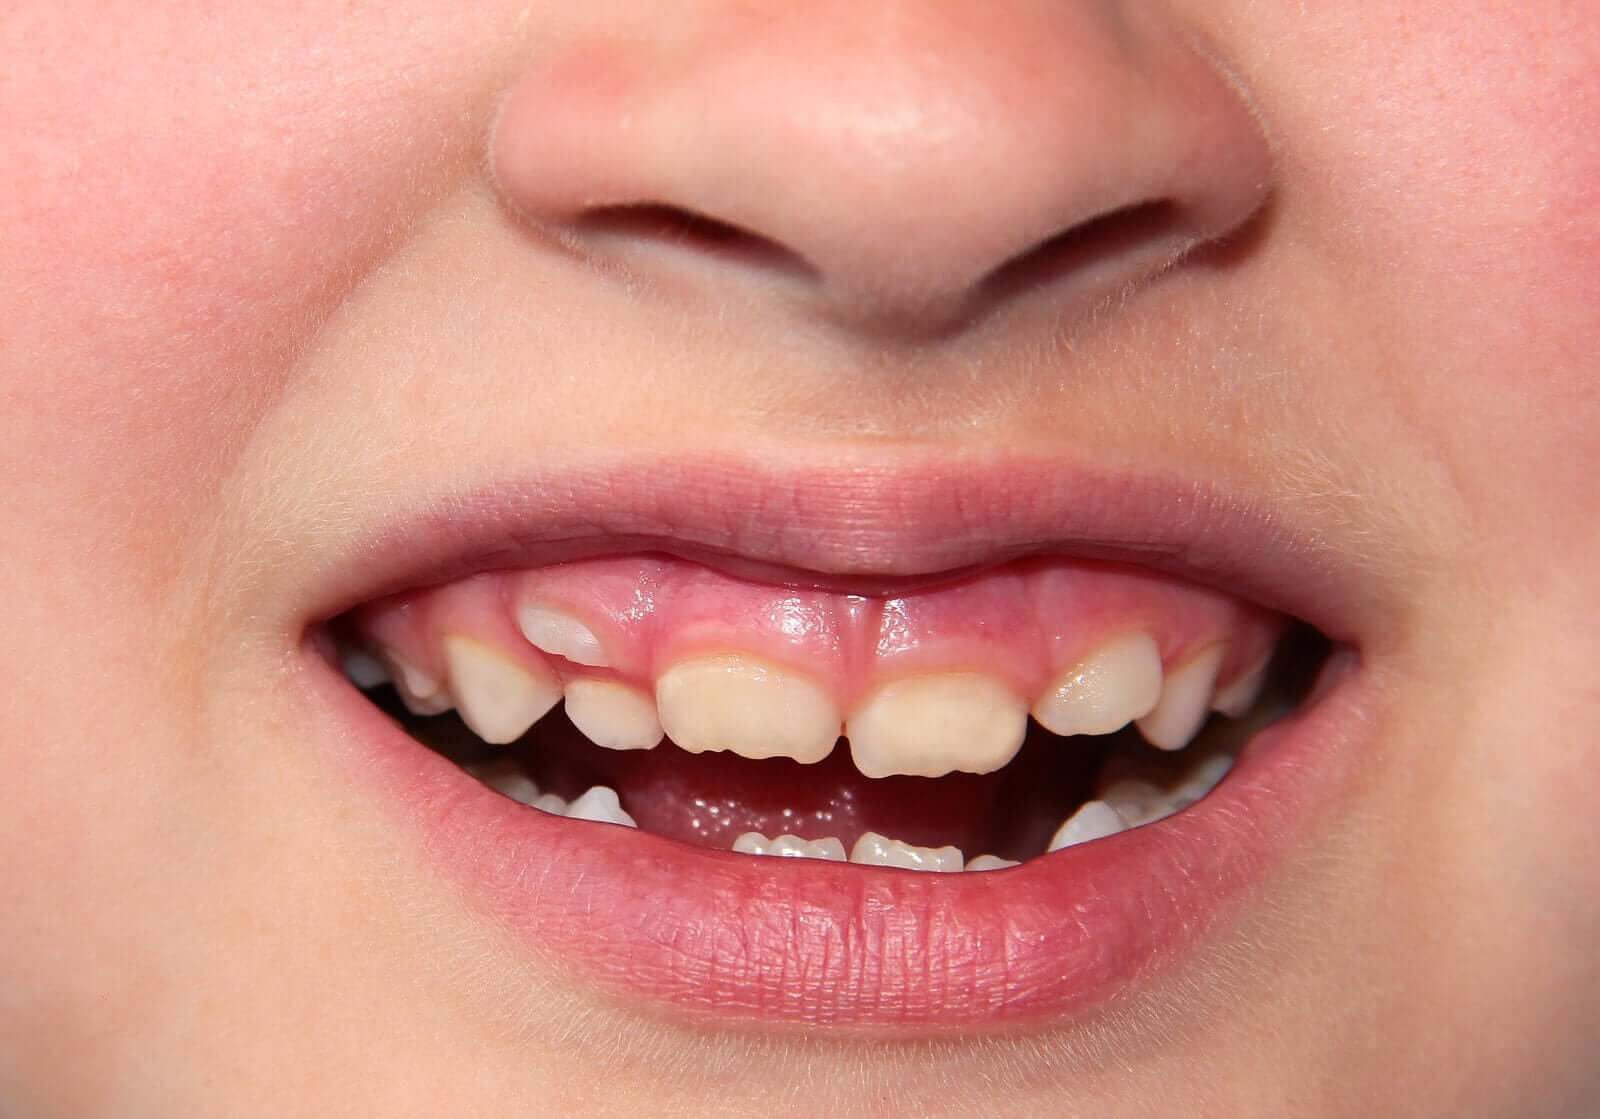 A child with a double row of teeth.